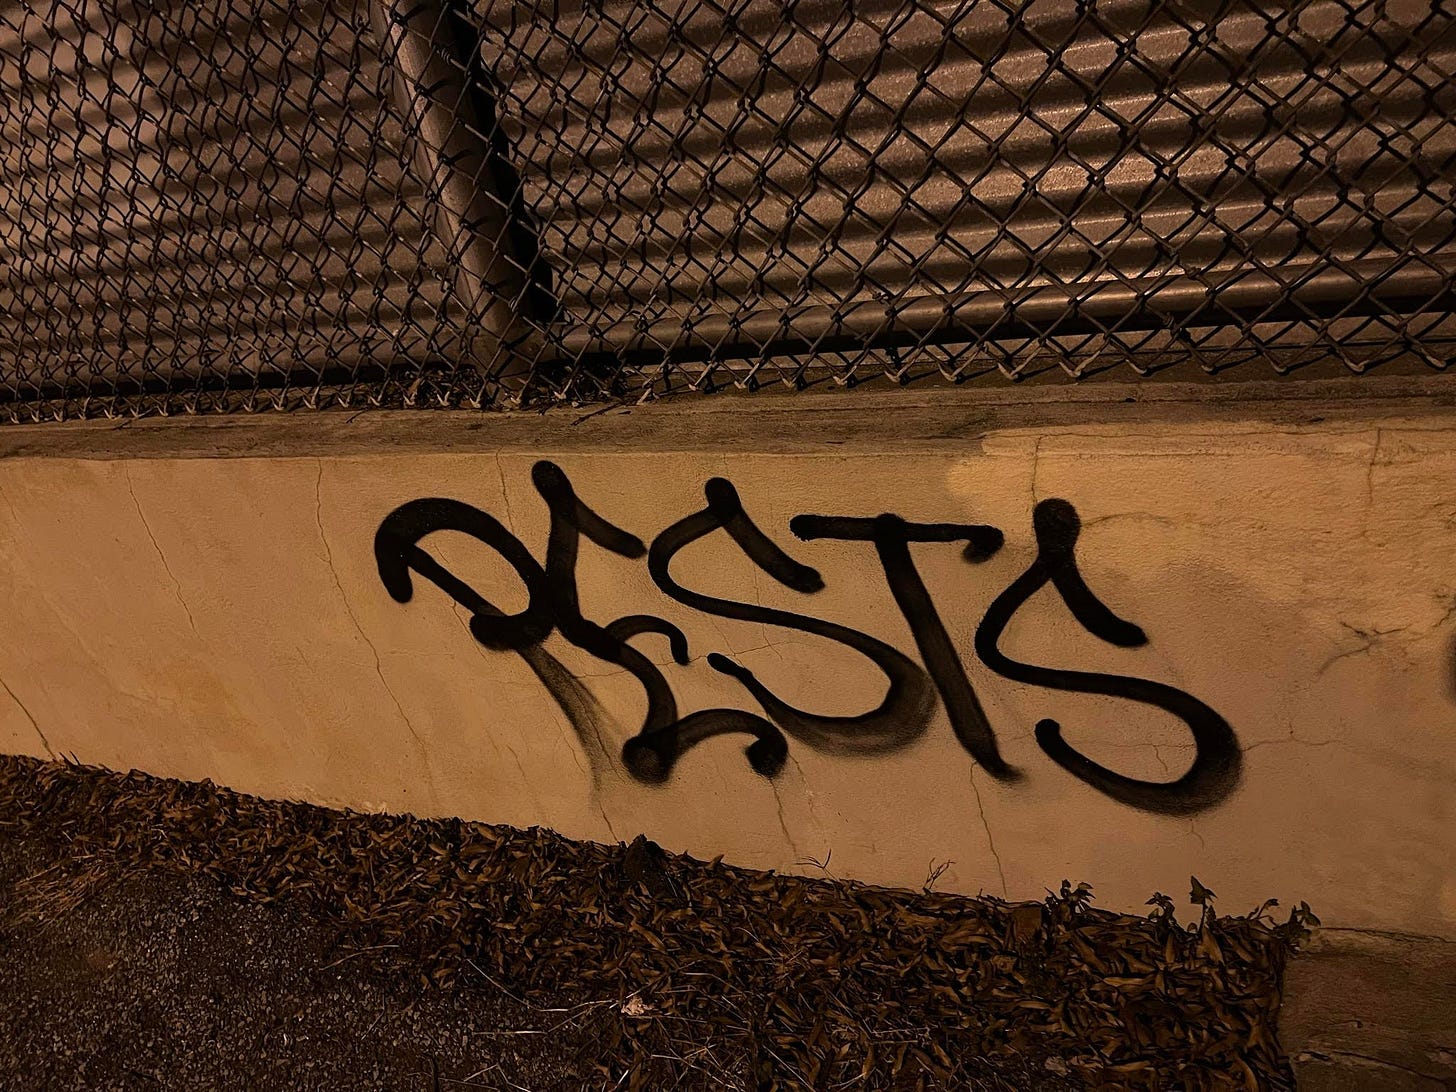 "PESTS" tagged on a low cement wall.